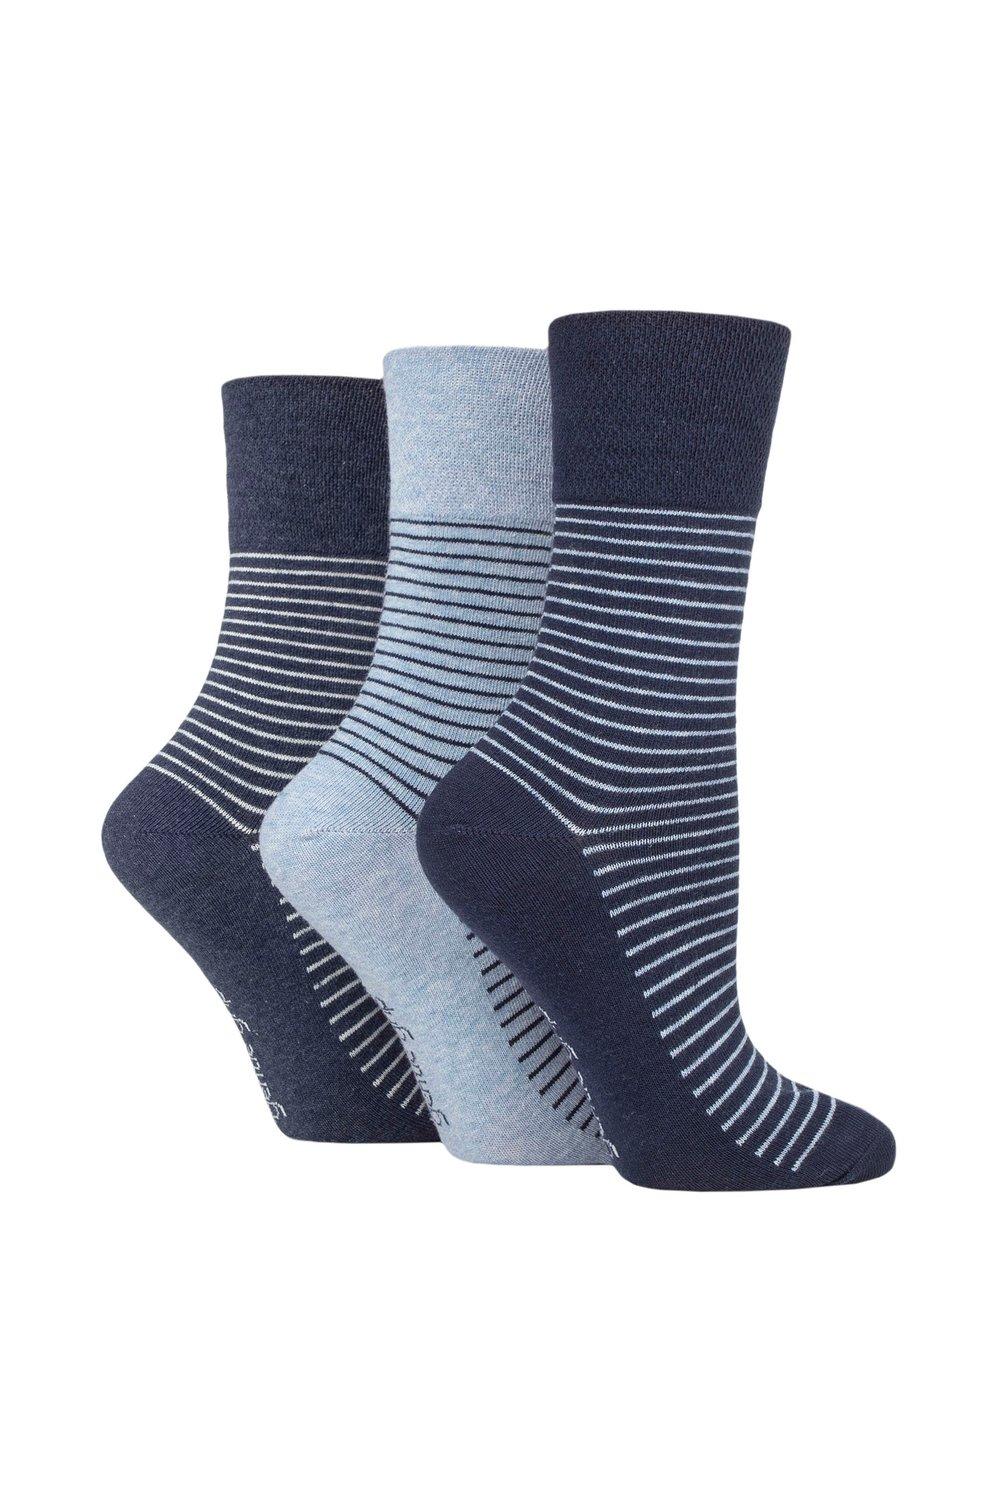 3 Pair Patterned and Striped Socks